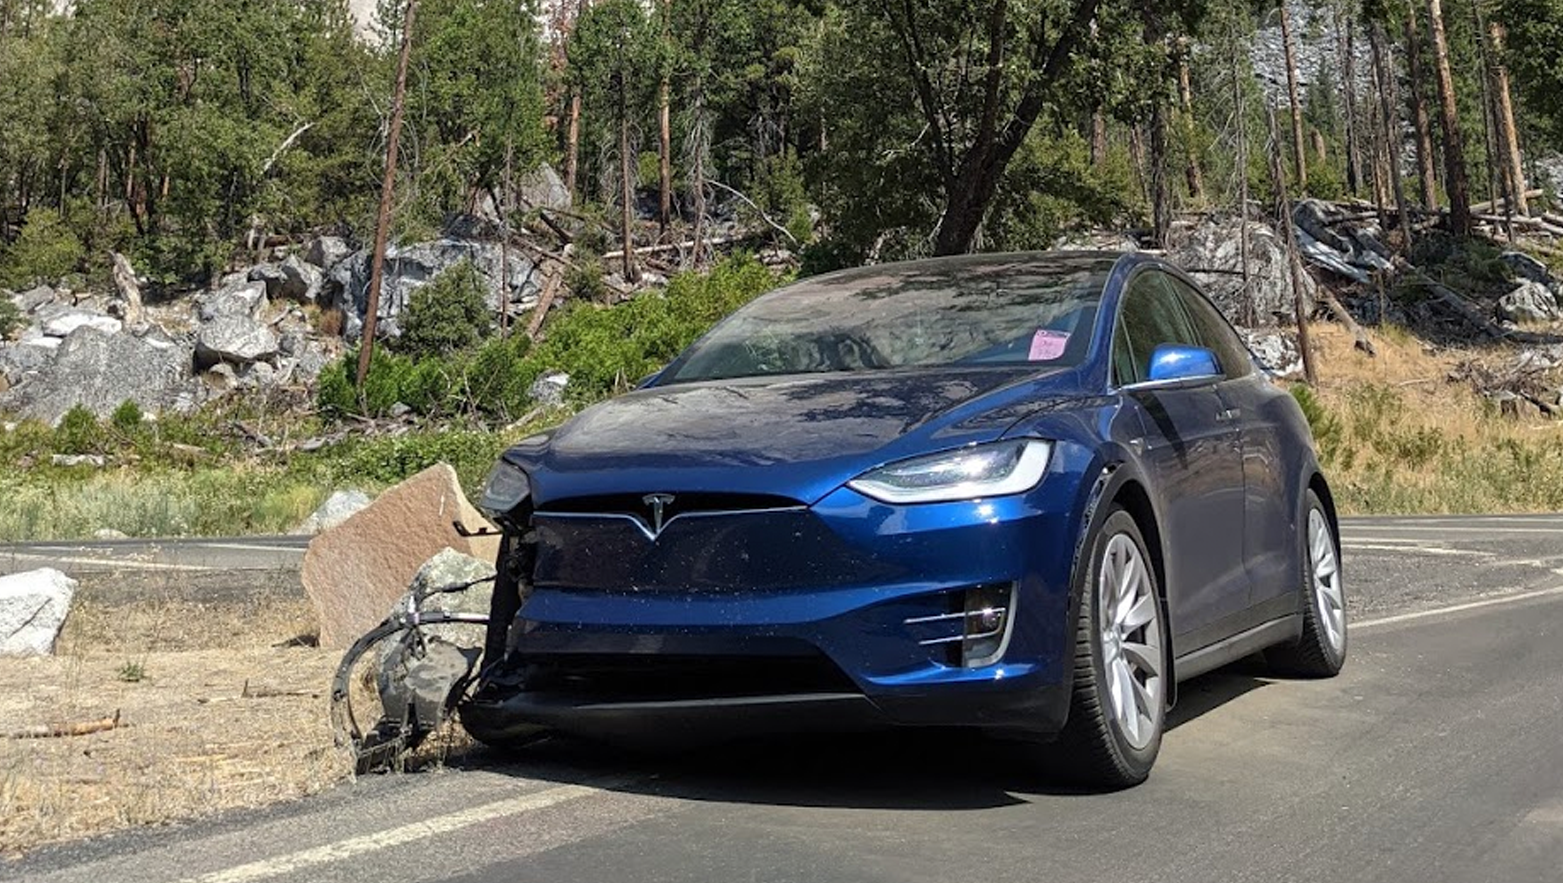 One Road Fork In Yosemite Seems To Have Caused Multiple Tesla Autopilot Wrecks